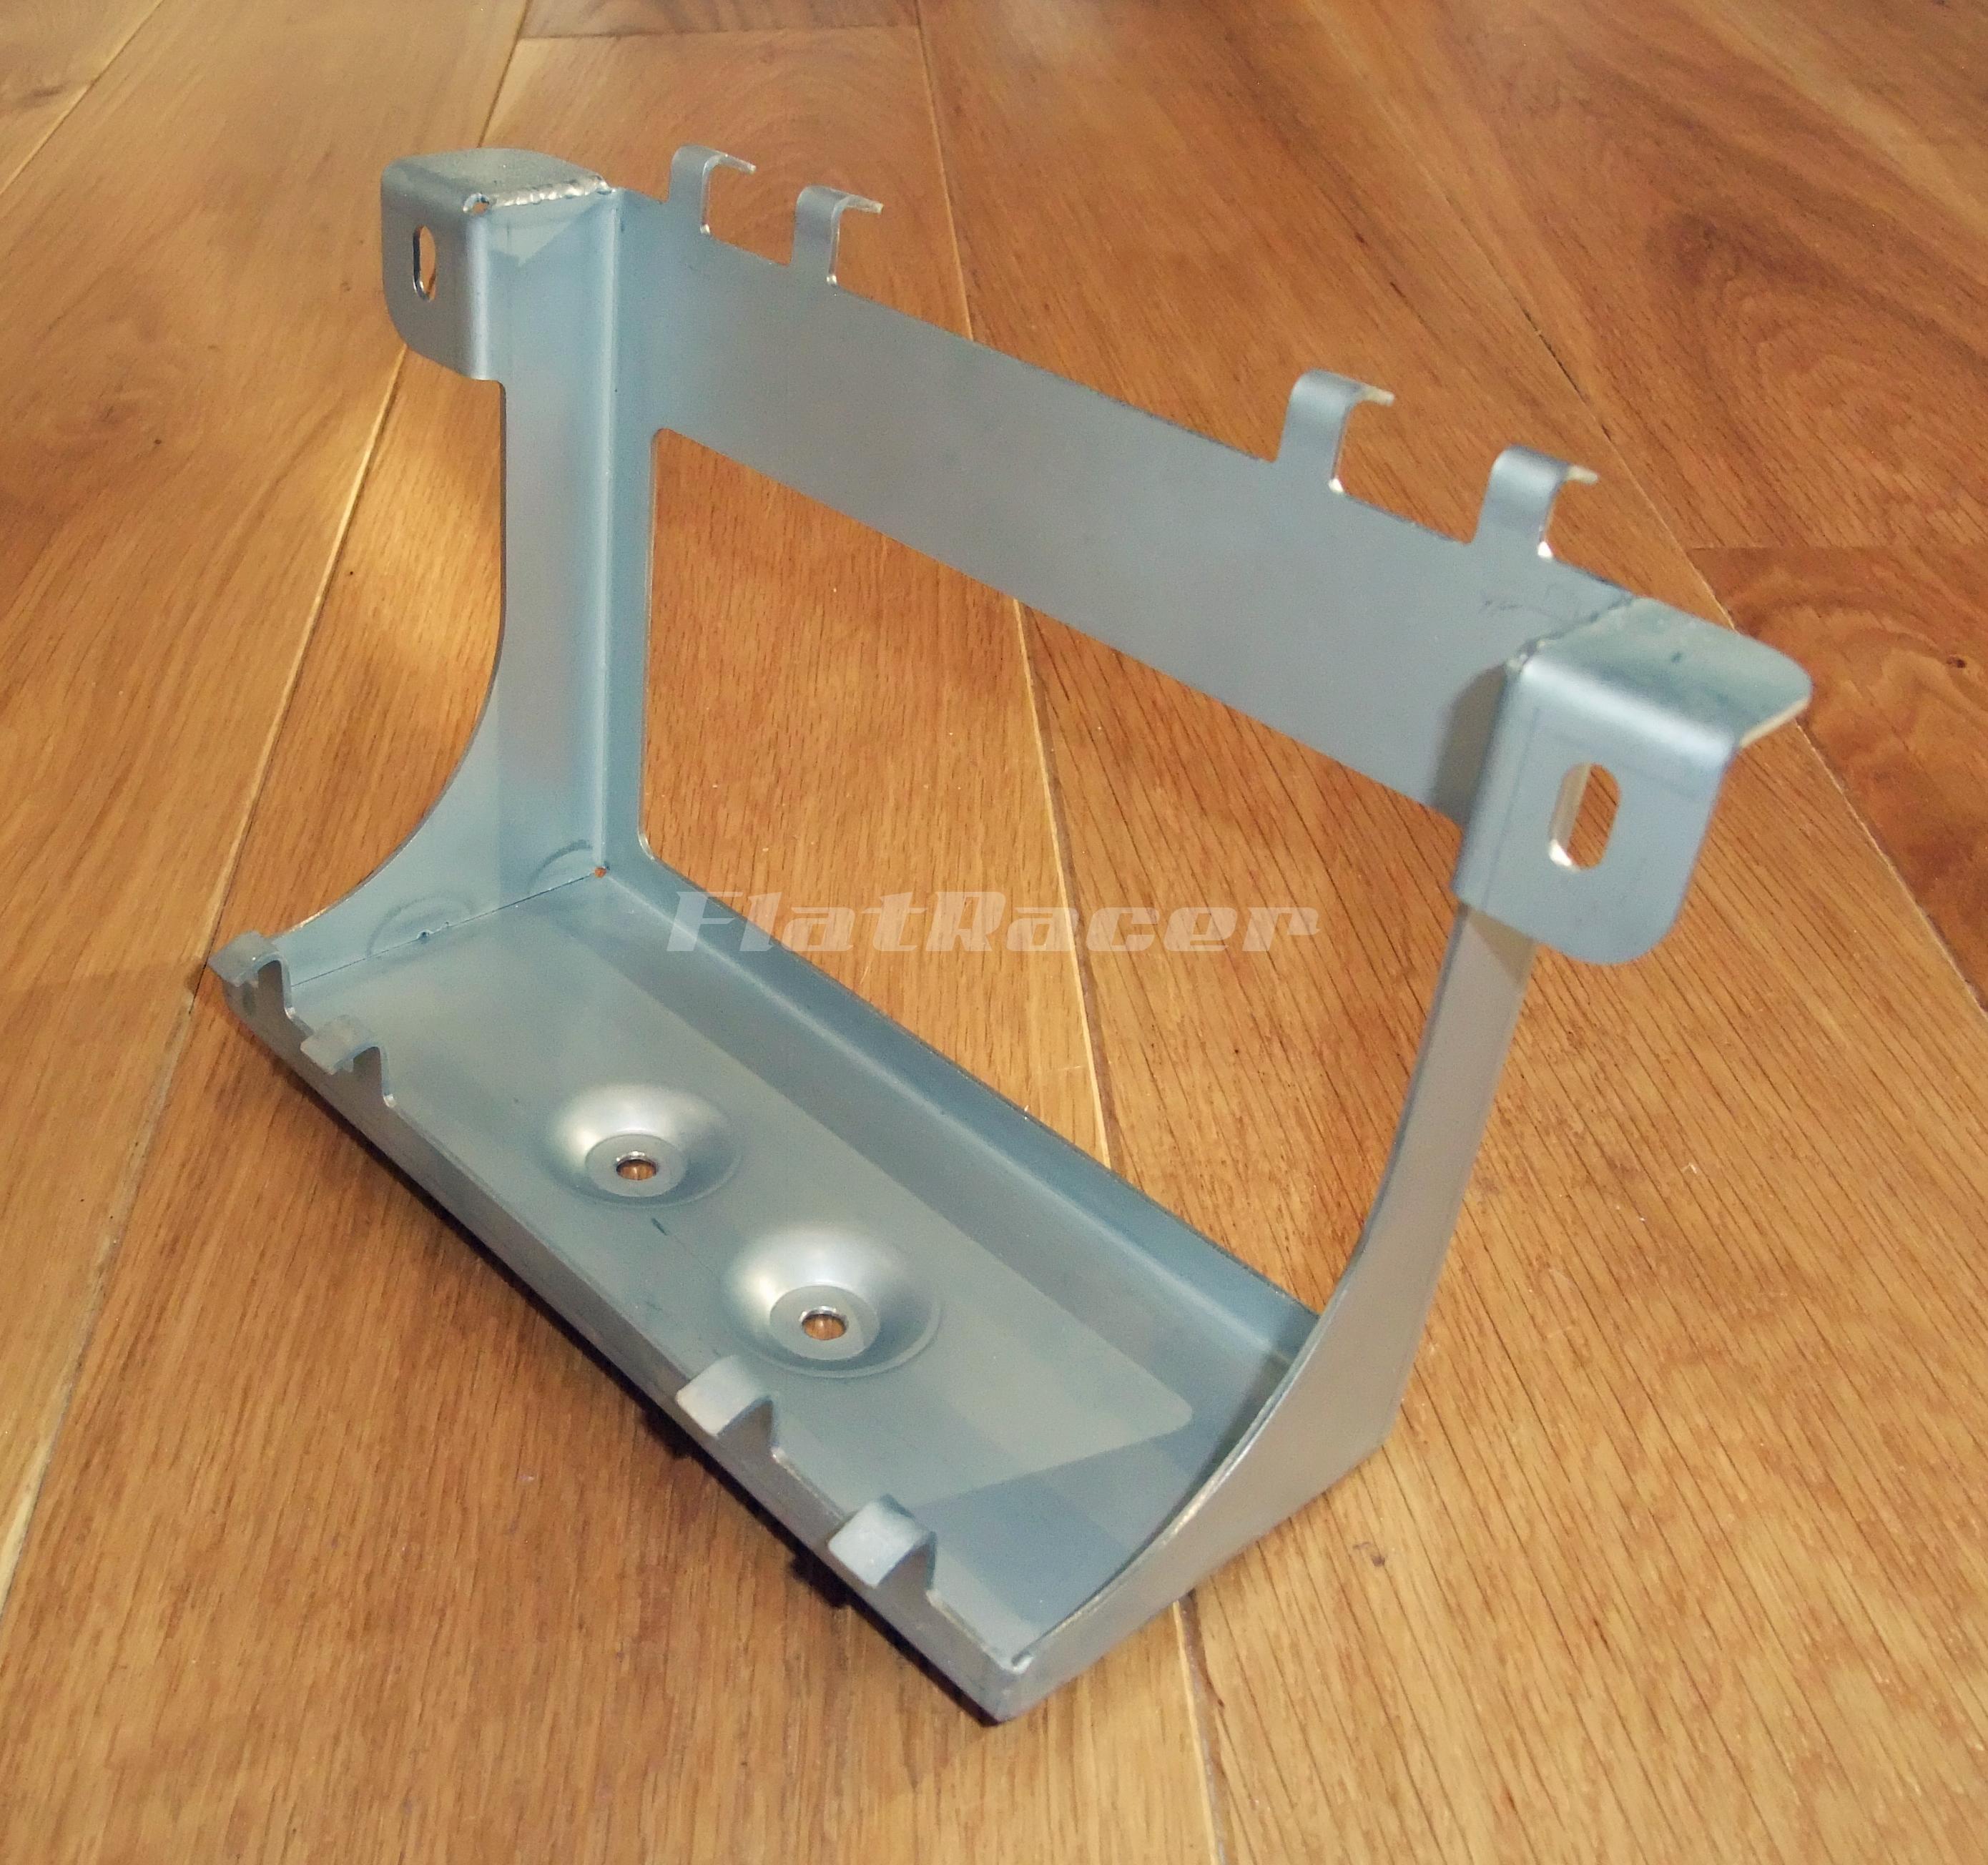 FlatRacer BMW Monolever (post 1985) stainless steel battery tray